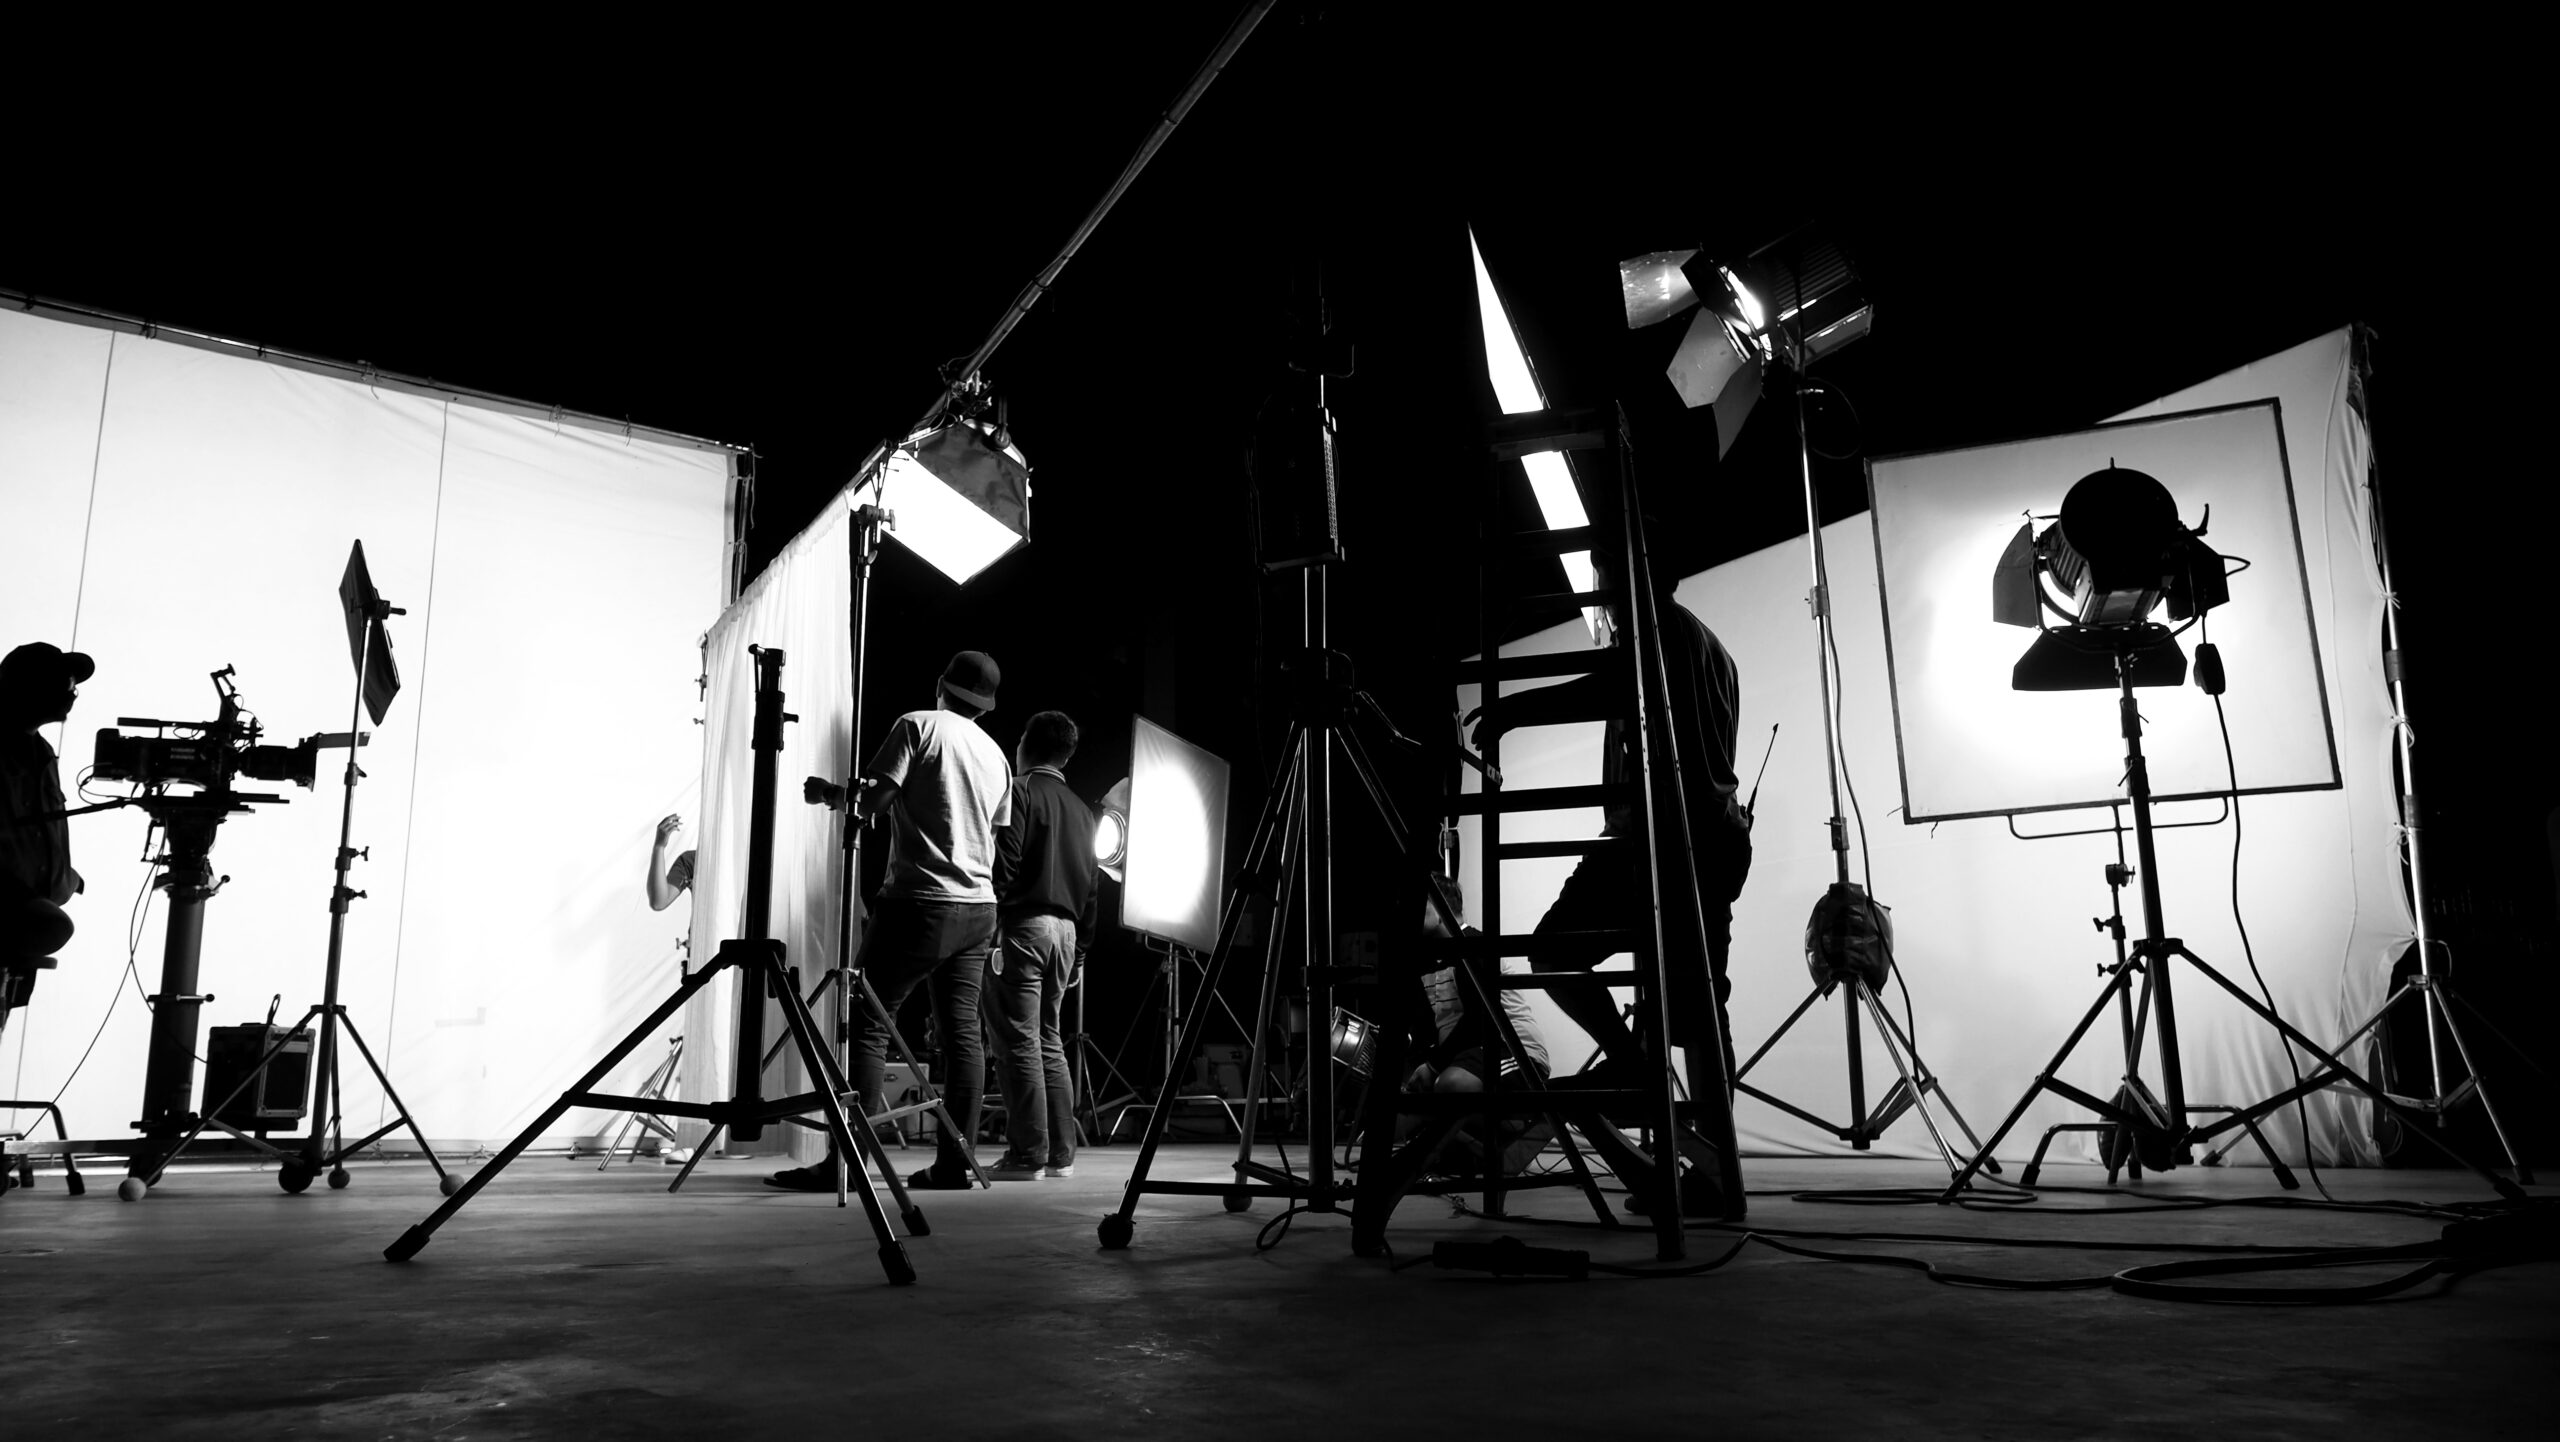 scenes-tv-commercial-movie-film-video-shooting-production-which-crew-team-camera-man-setting-up-green-screen-chroma-key-technique-big-studio-scaled.jpg